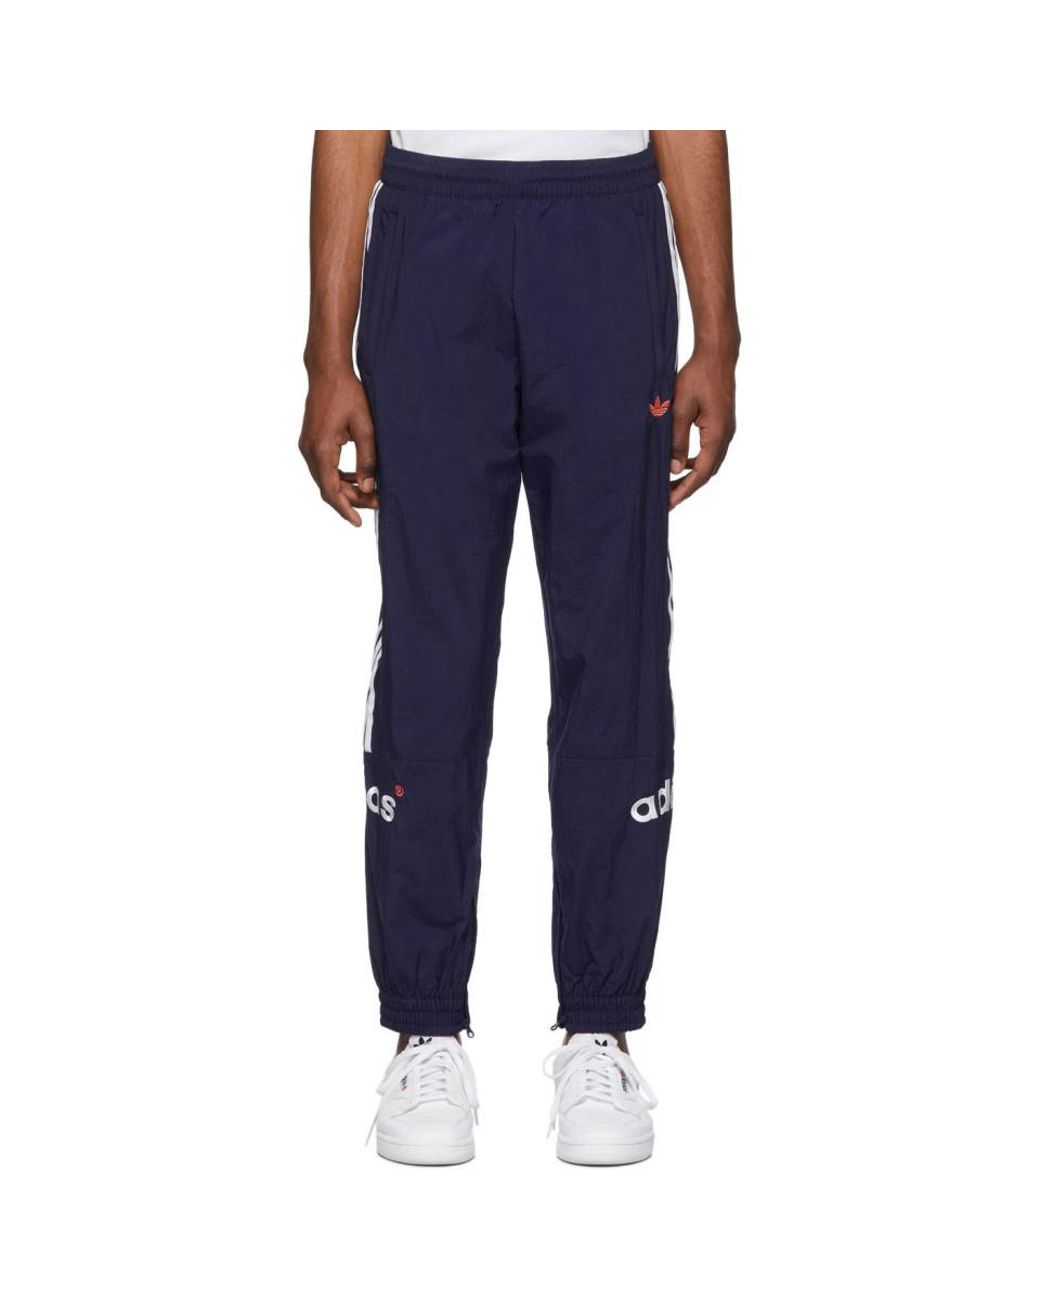 adidas Originals Navy Archive Track Pants in Blue for Men - Lyst